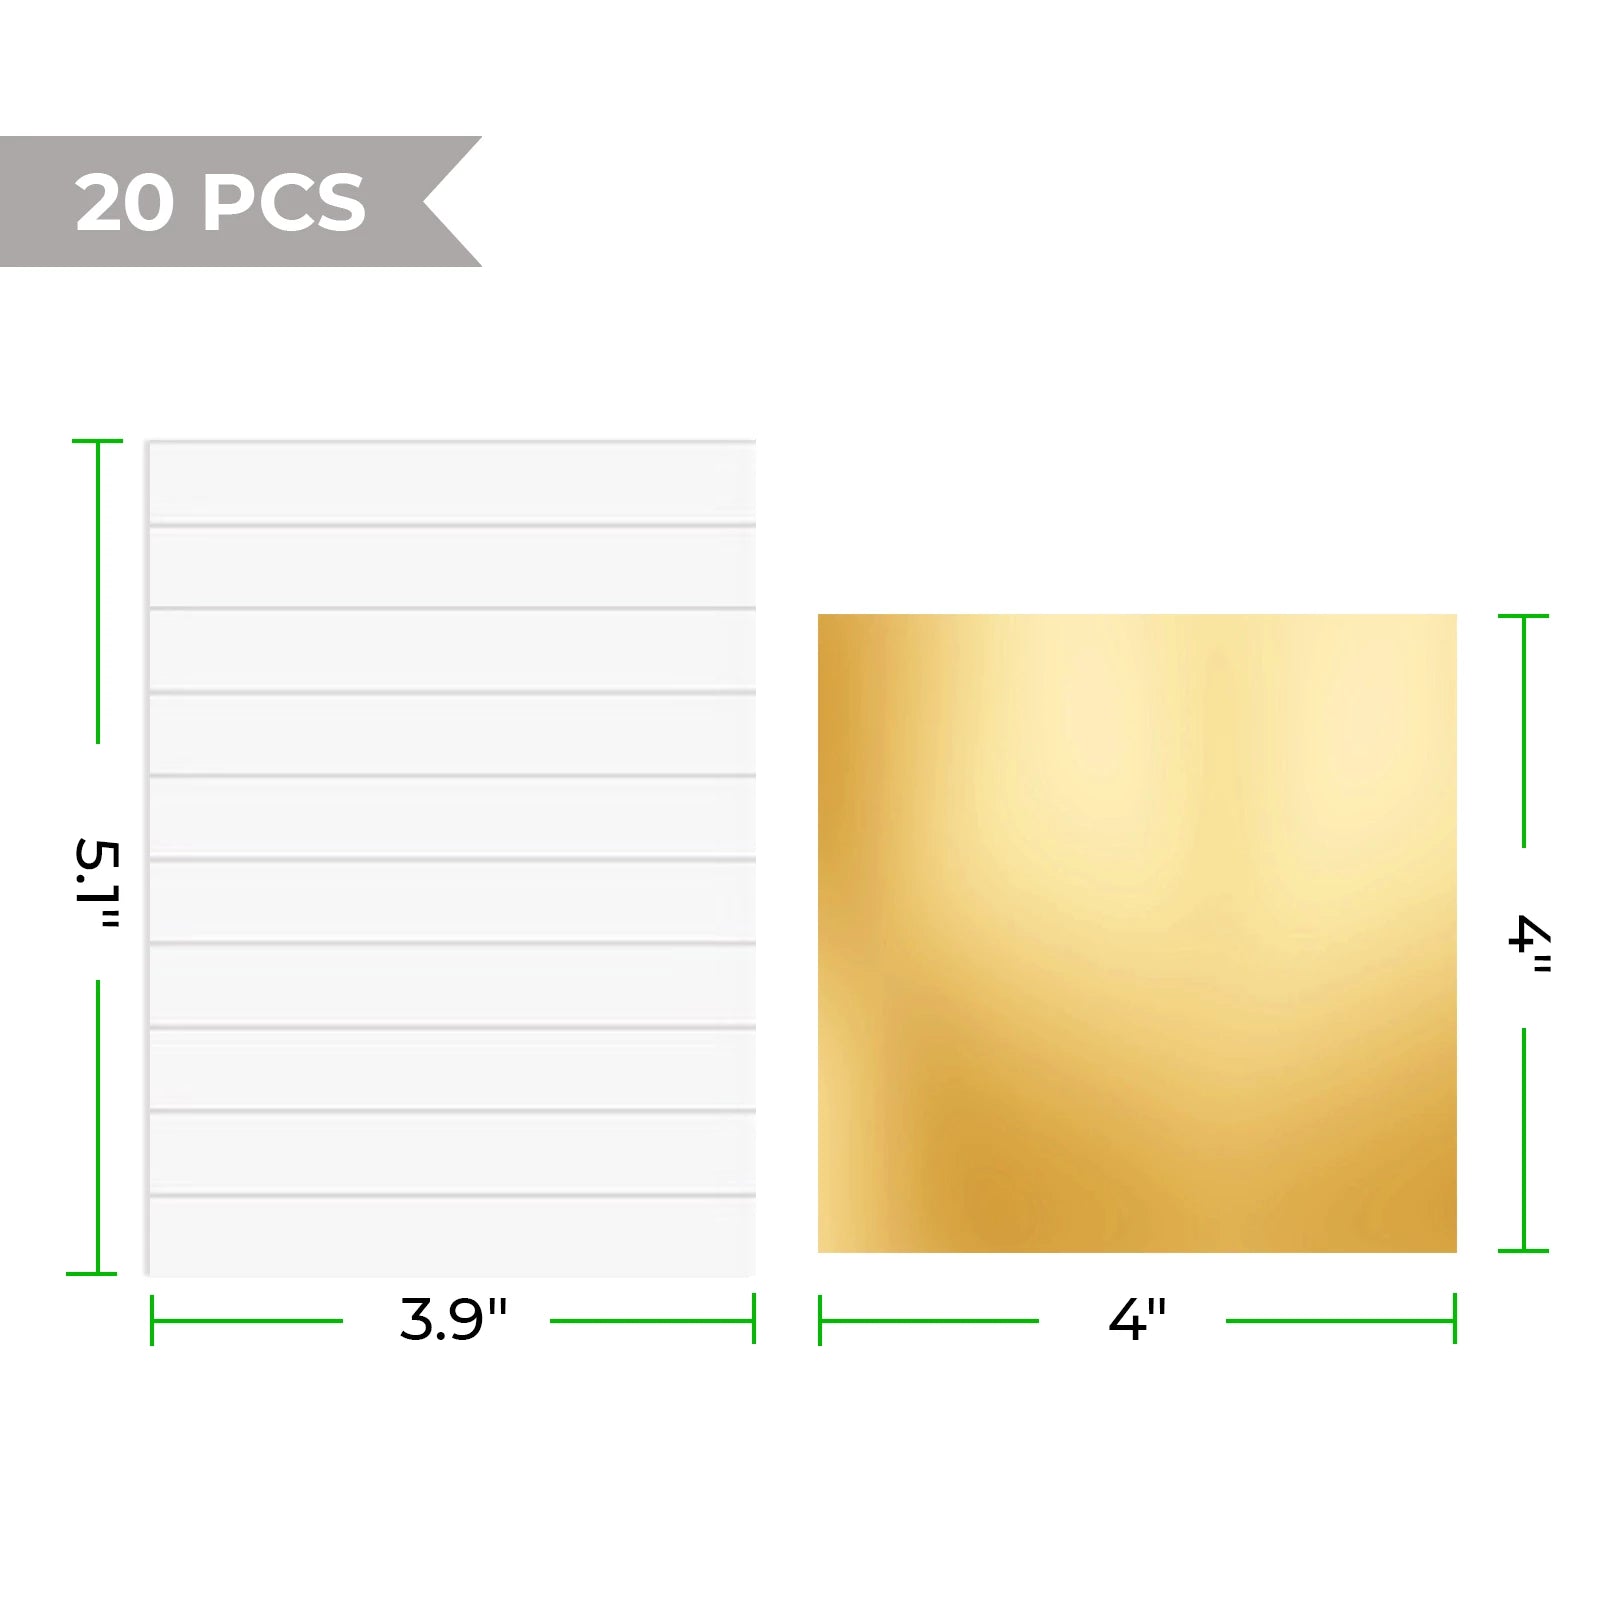 Gold and Silver Foil Transfer Paper (20pcs)